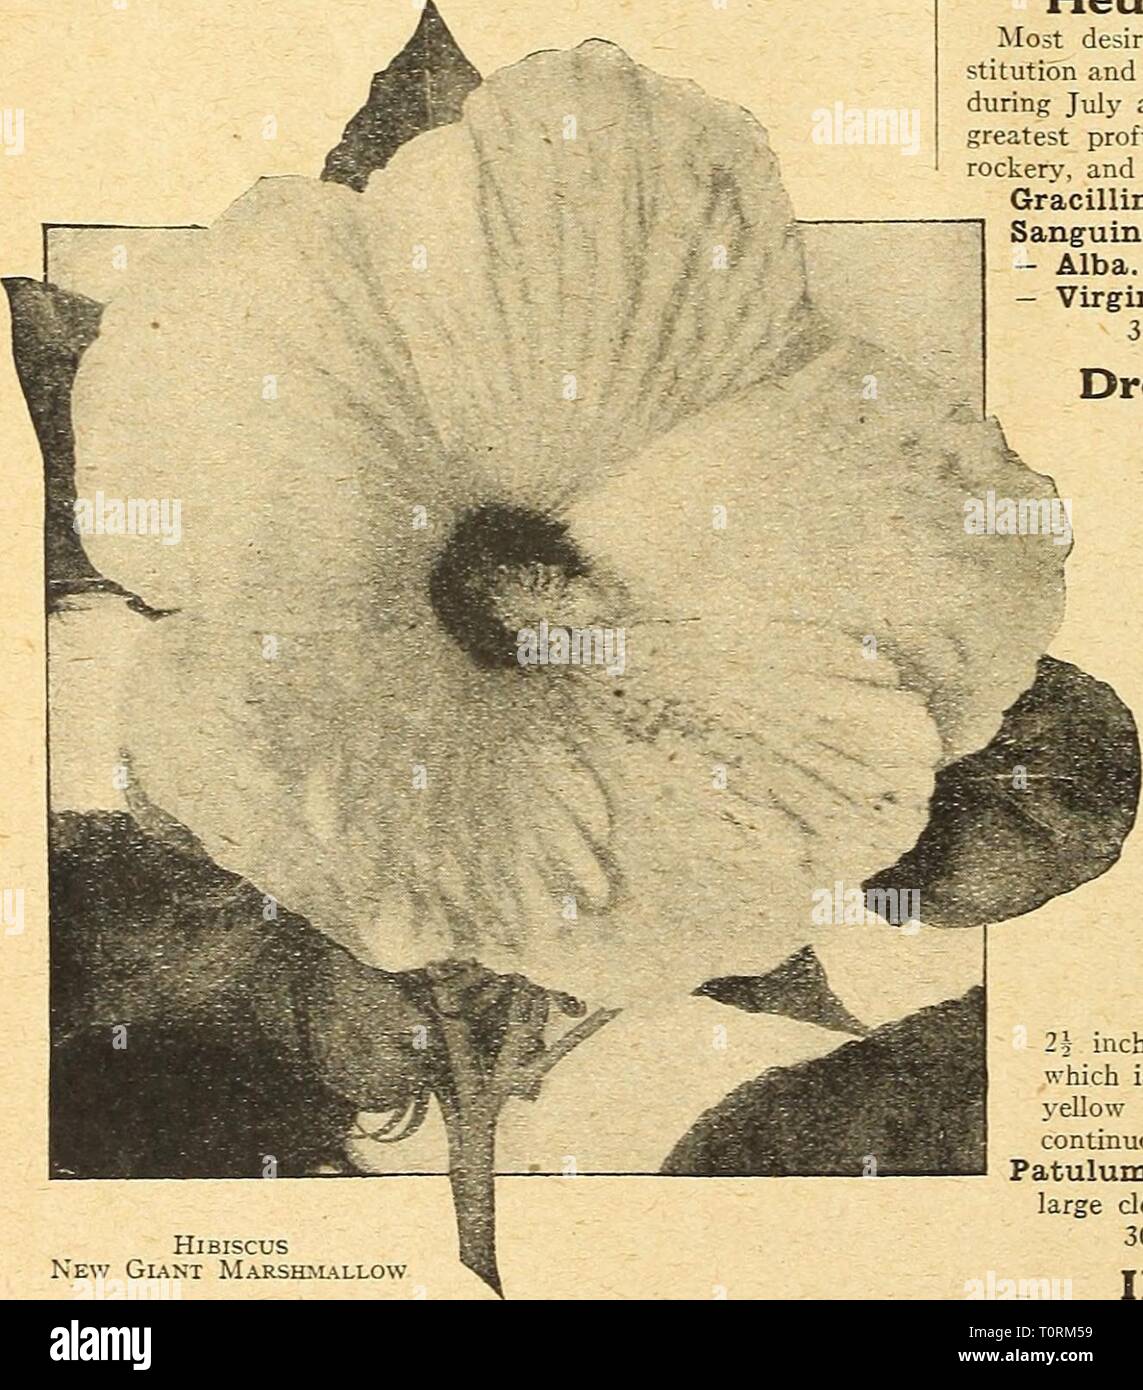 Dreer's autumn catalogue 1924 (1924) Dreer's autumn catalogue 1924  dreersautumncata1924henr Year: 1924  Hr.MERocALLis OR Day Lily    Hibiscus New Giant Marshm.llow Hepatica (Liver Leaf) Triloba. A pretty native spring-flowering plant, with light blue flowers, useful as a rock plant or for a shady spot in the border, 25 cts. each; S2.50 per doz. HeUChera (Alum Root, or Coral Bells) Most desirable dwarf, compact bushj' plants of robust con- stitution and easy culture, growing li to 2 feet high, and bearing during July and August loose, graceful spikes of flowers in the greatest profusion; exce Stock Photo